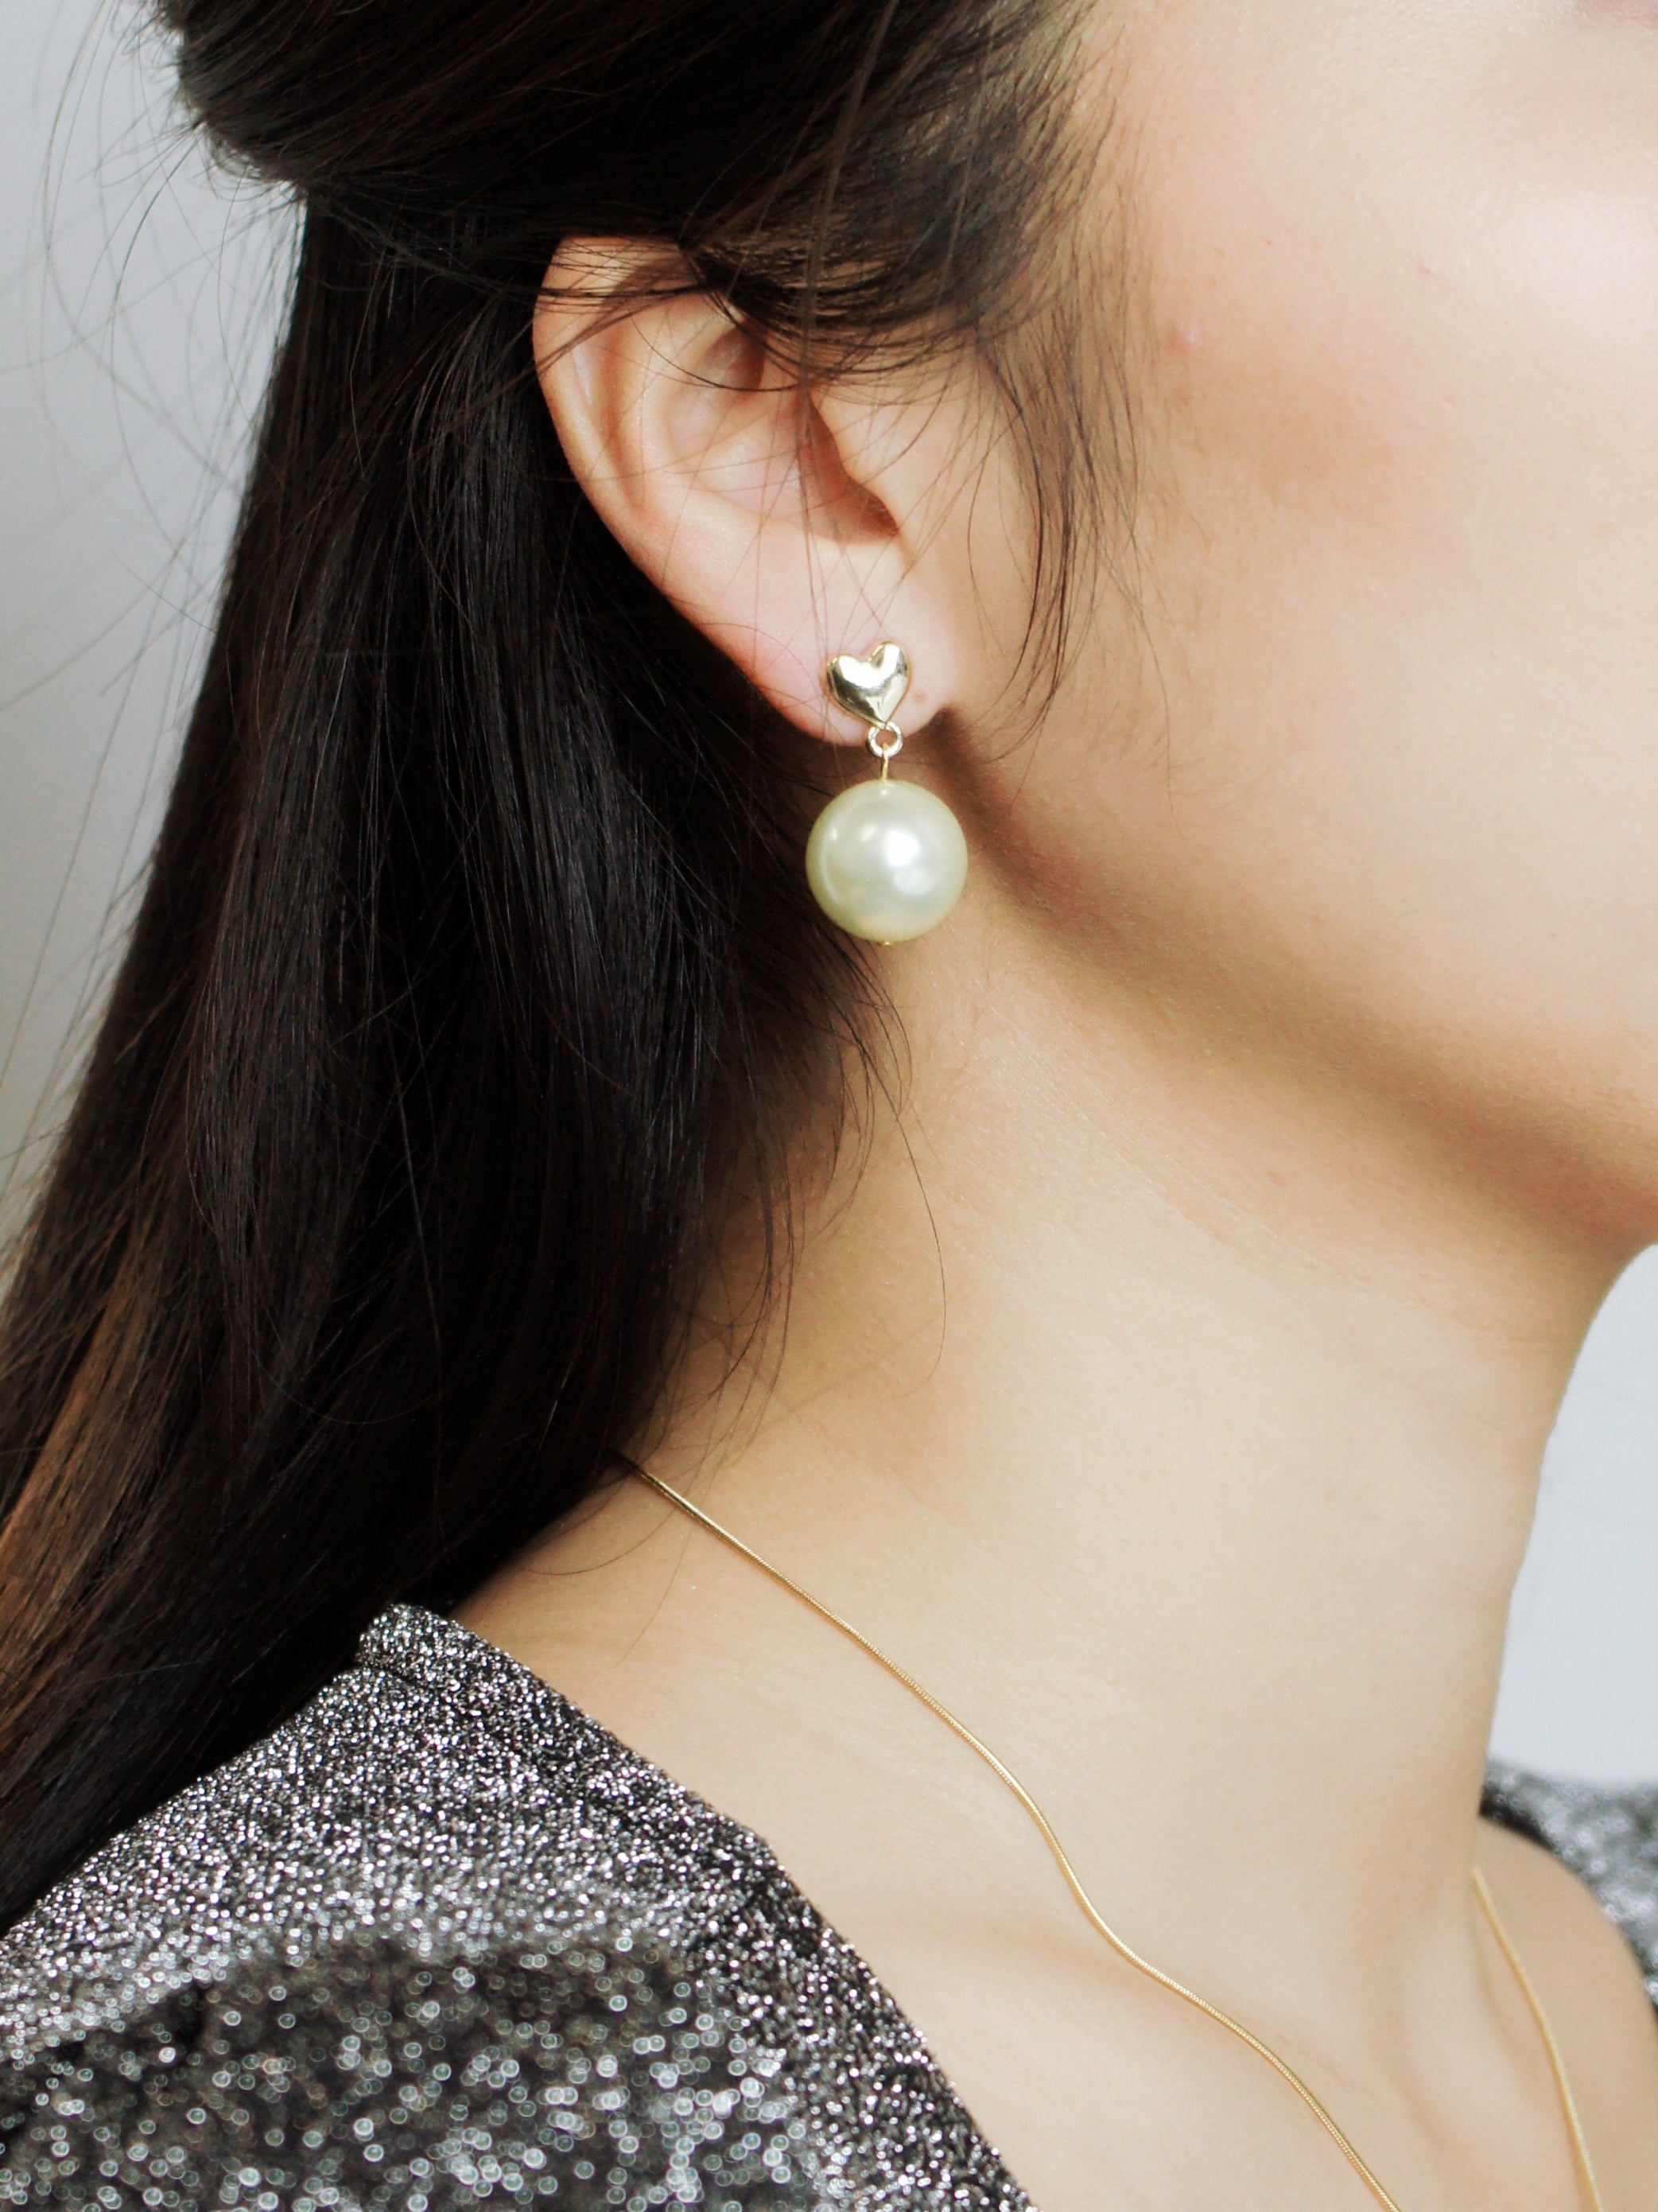 My Precious Pearl Drop Earrings with Heart Studs